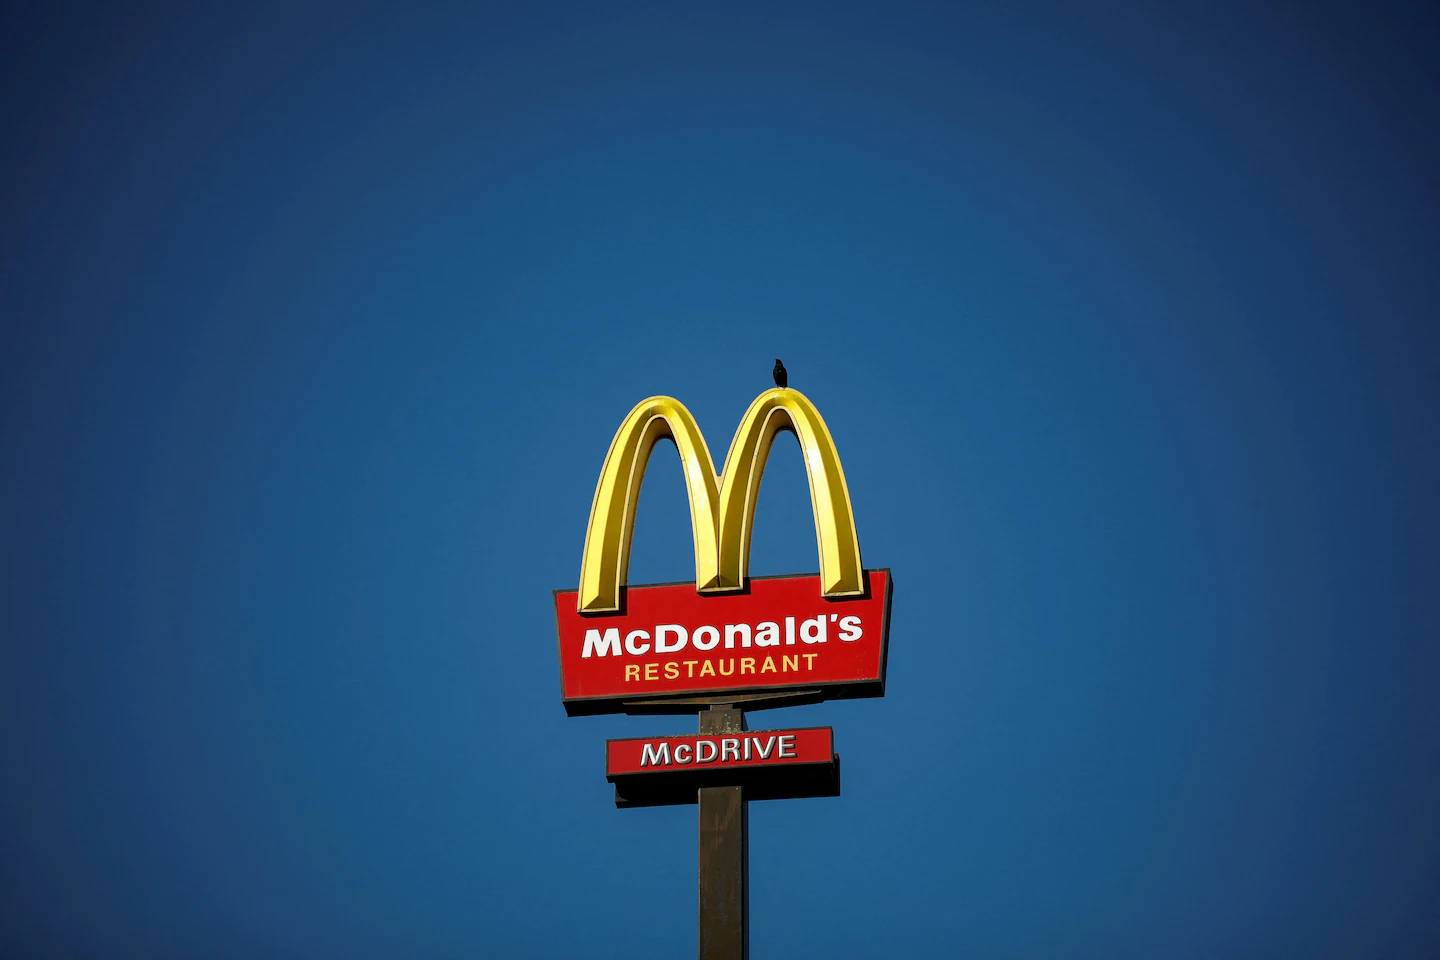 Carl Icahn starts a proxy fight with McDonald’s over the welfare of pigs